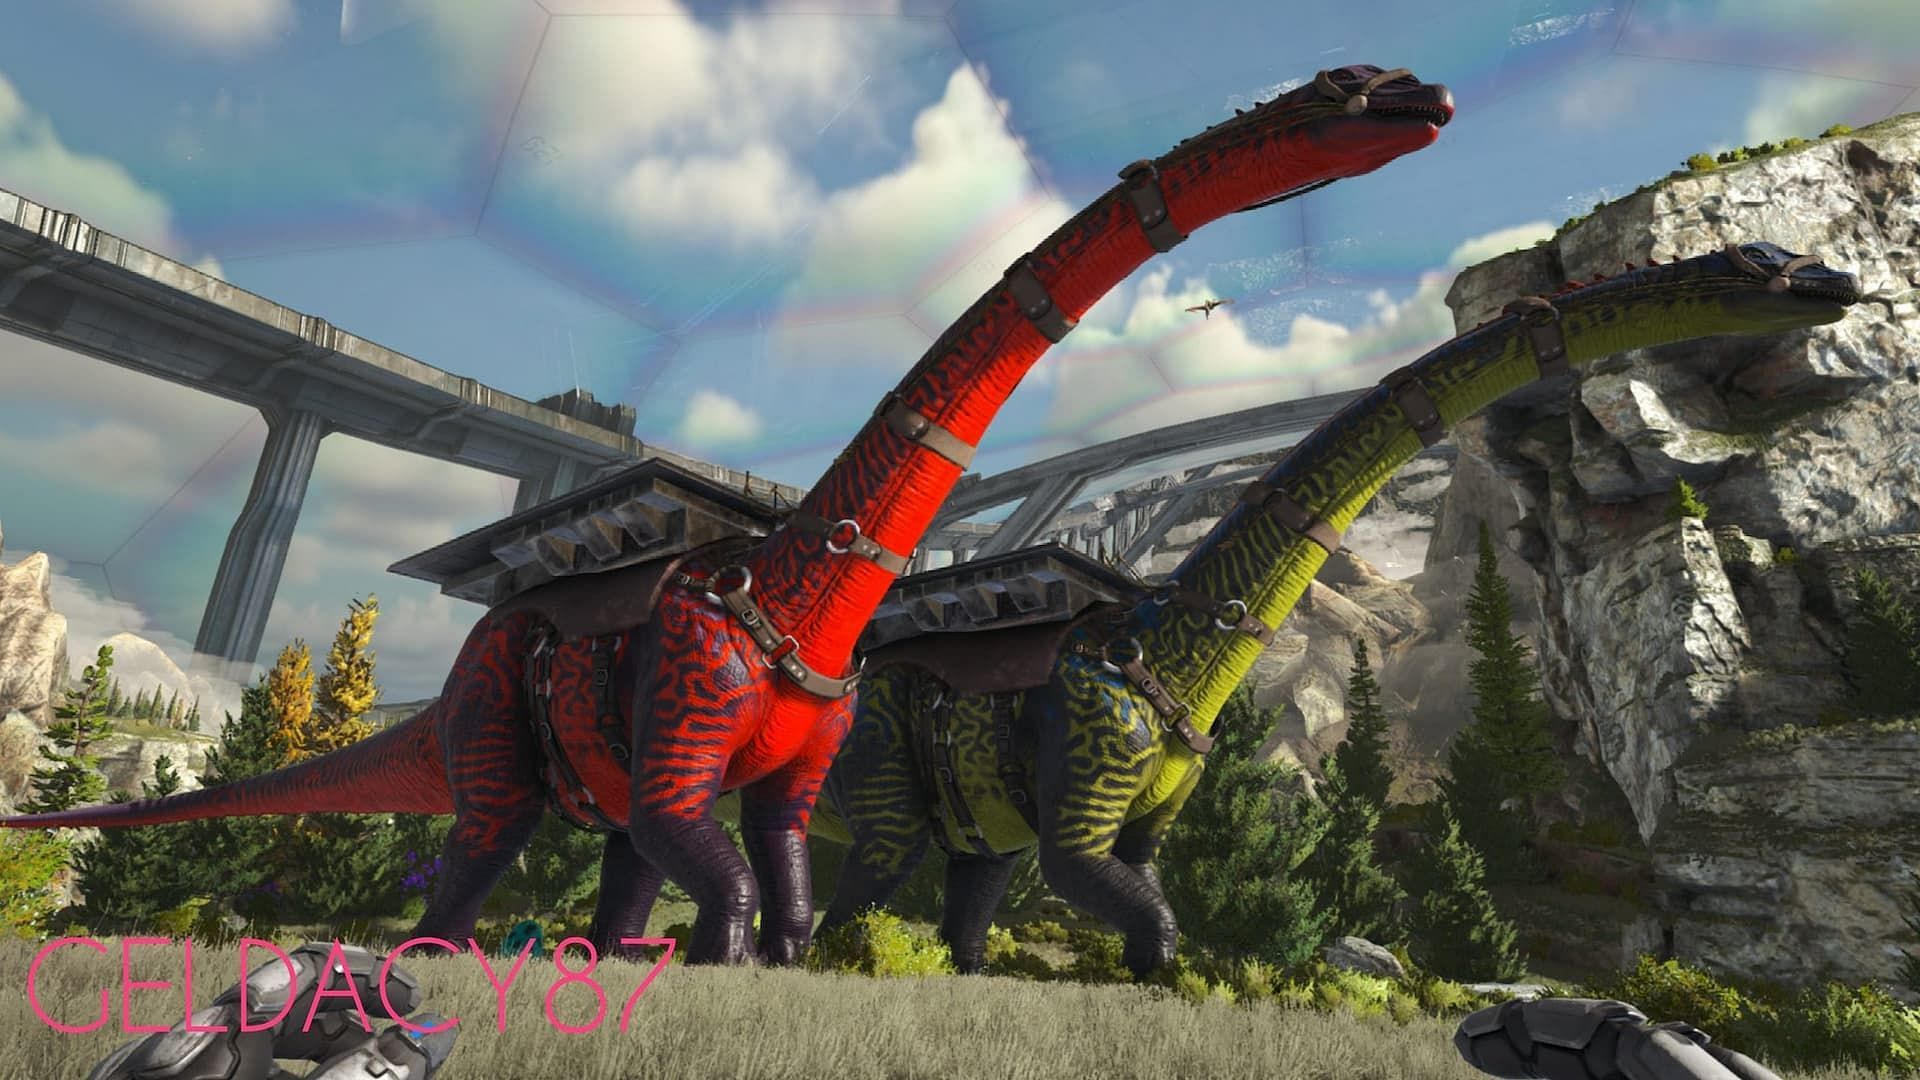 Mutated red Brontosaurus in Ark Survival Ascended